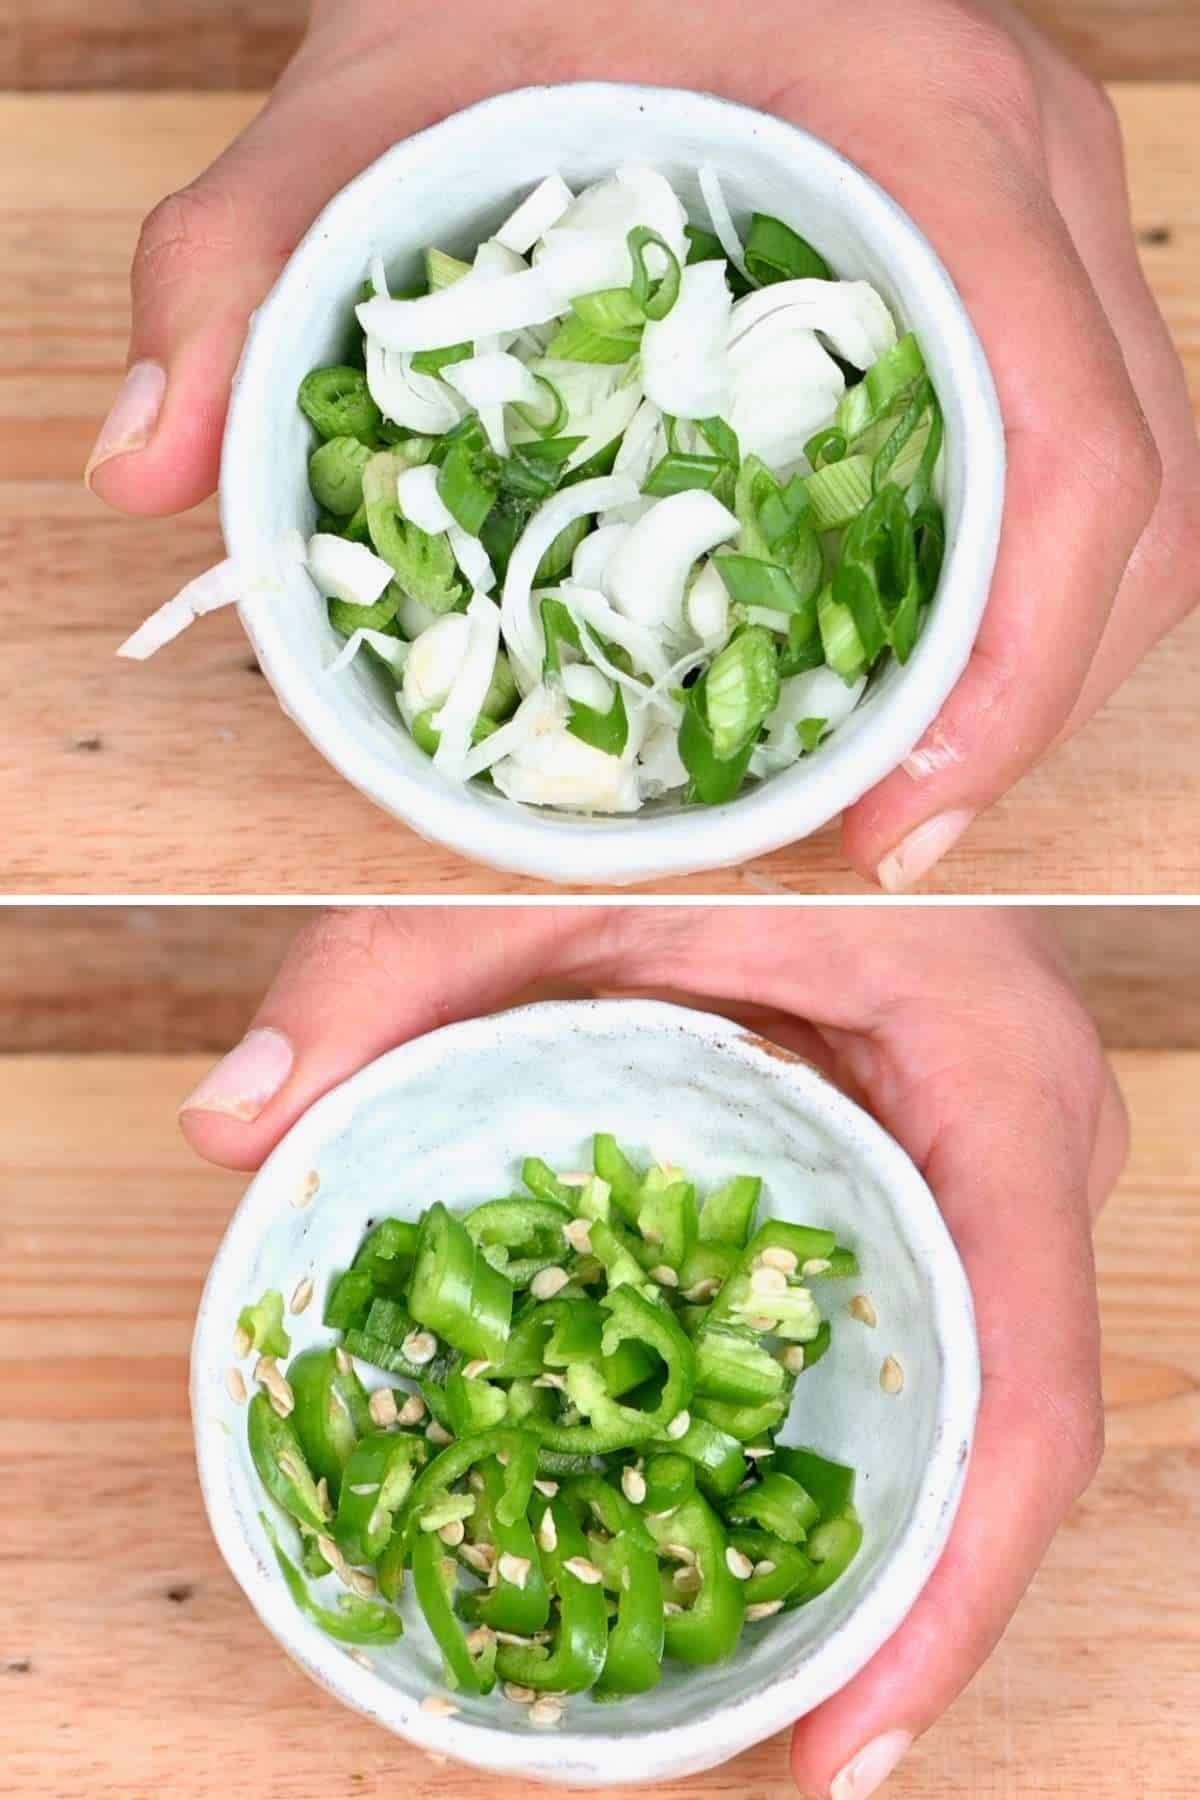 Chopped spring onion and green chili